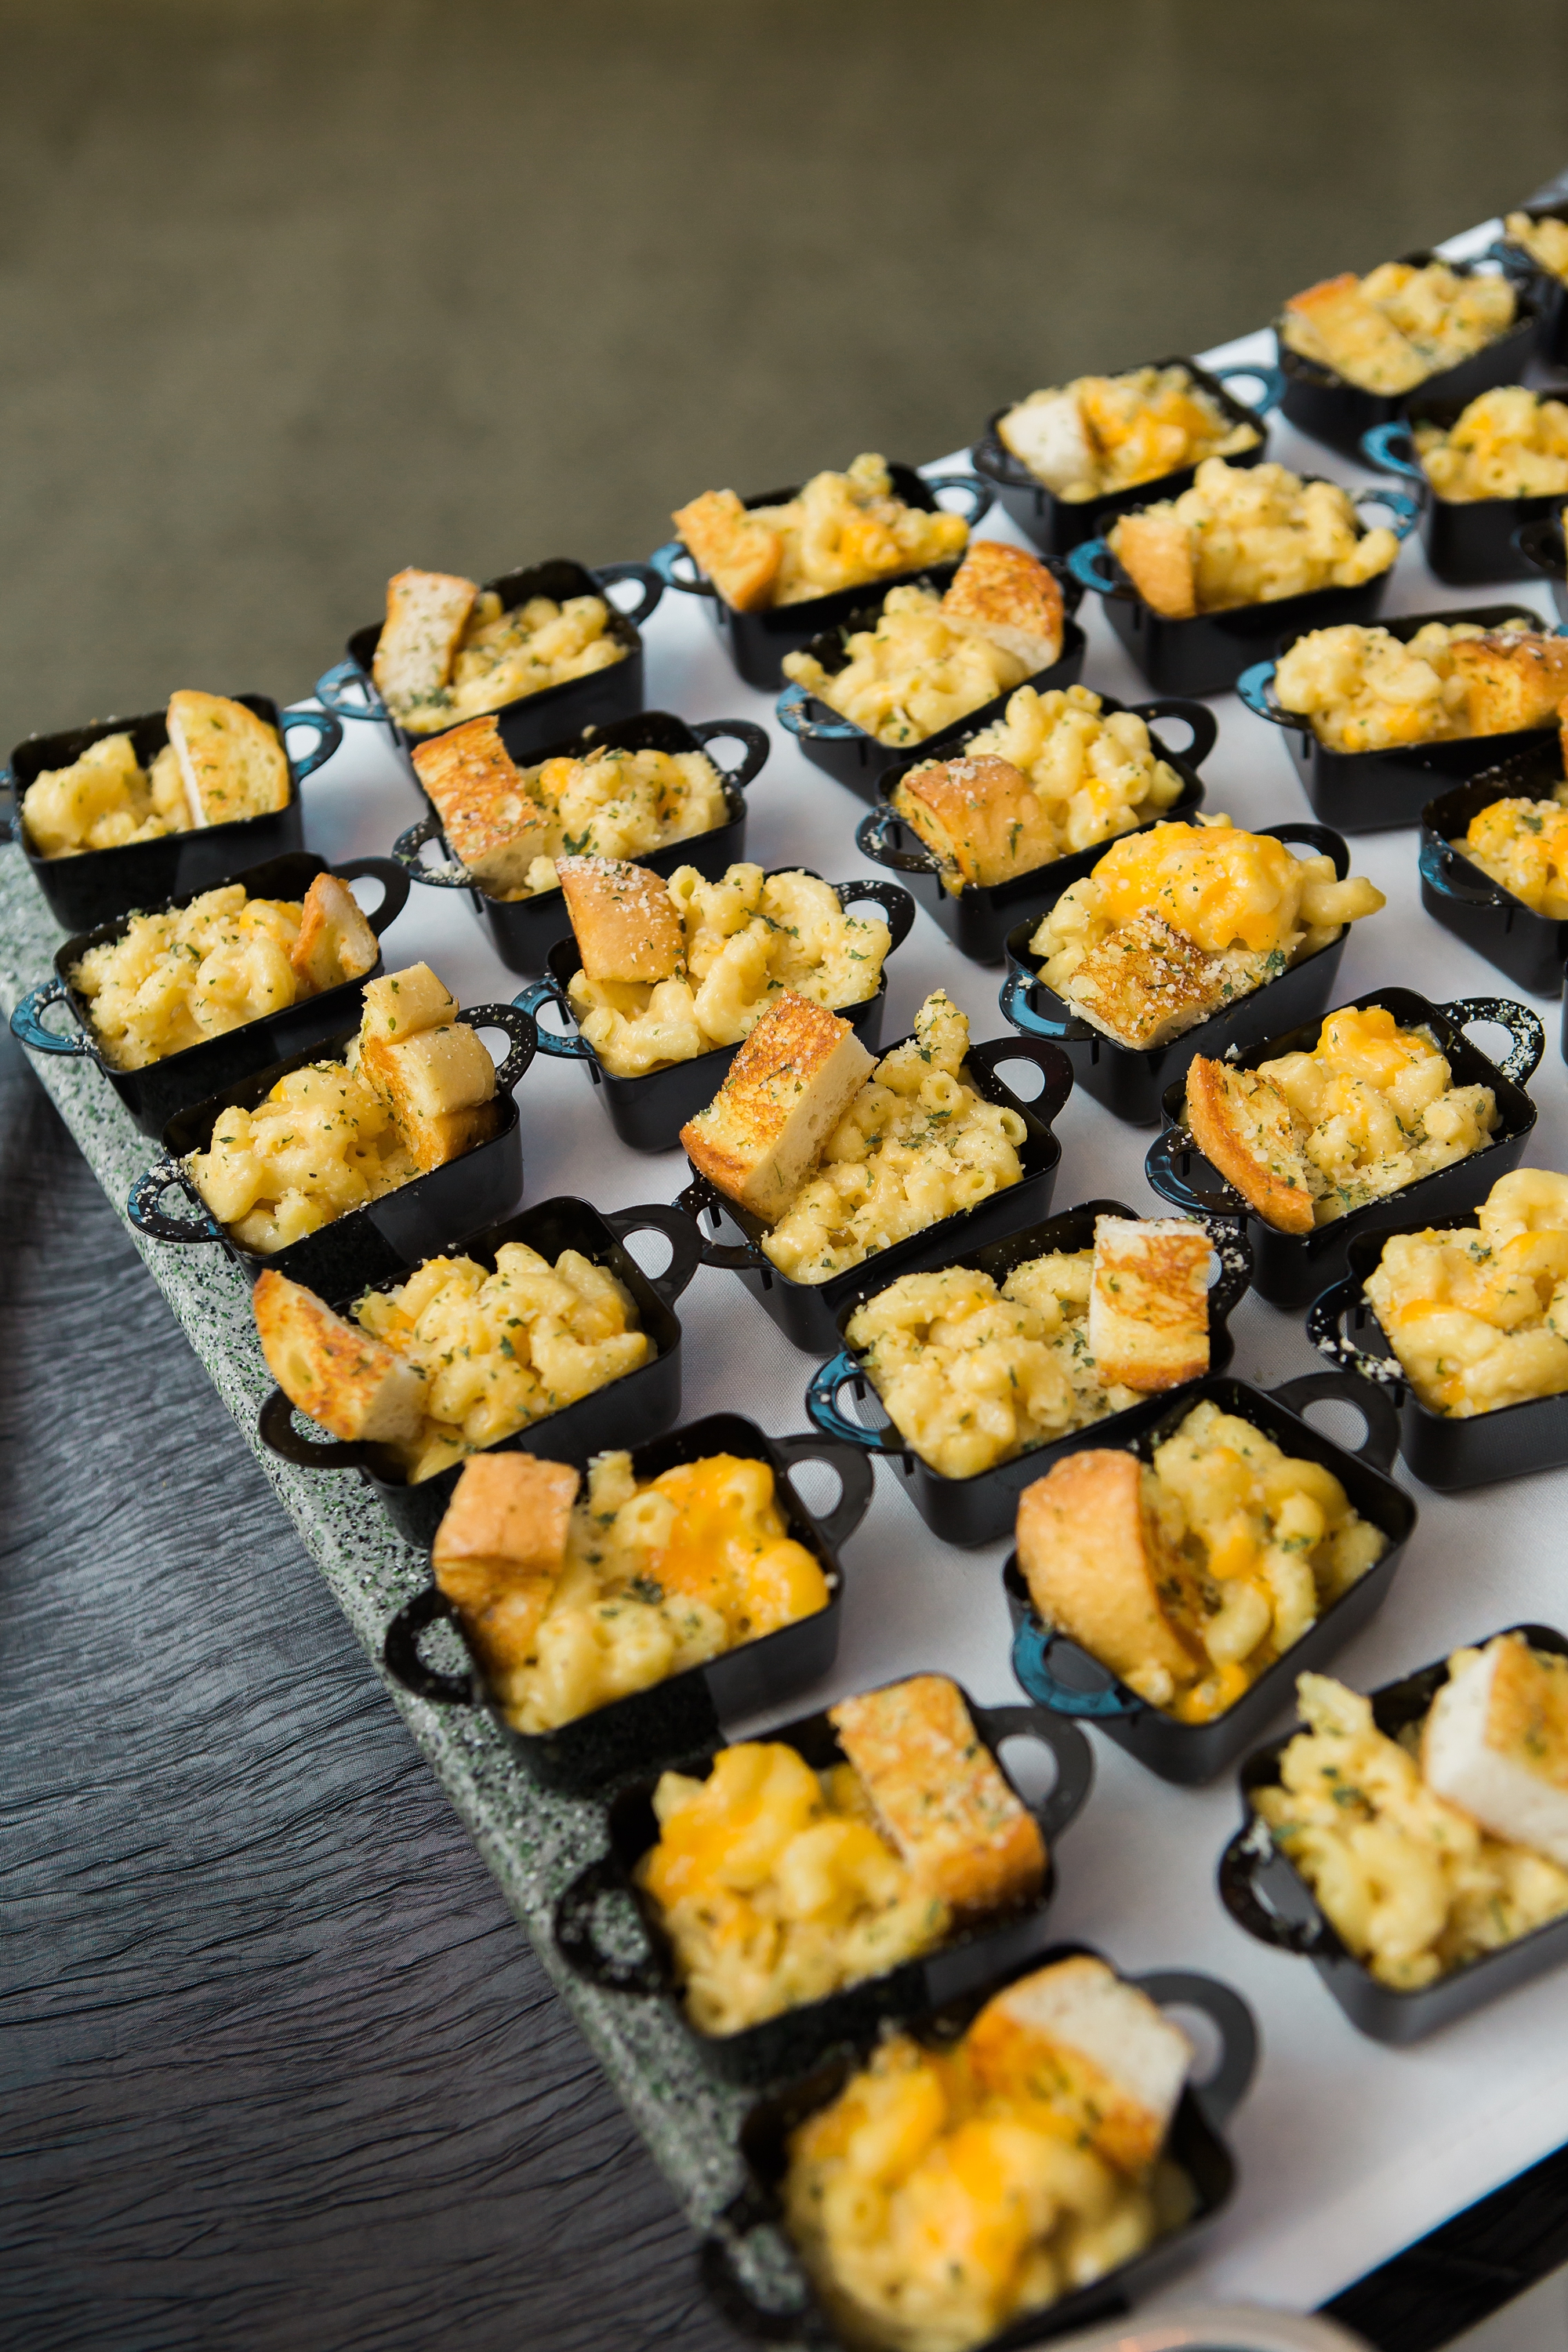 Mac and Cheese station at the reception. East Lake Golf Club by Top Atlanta Wedding Photographers Leigh and Becca